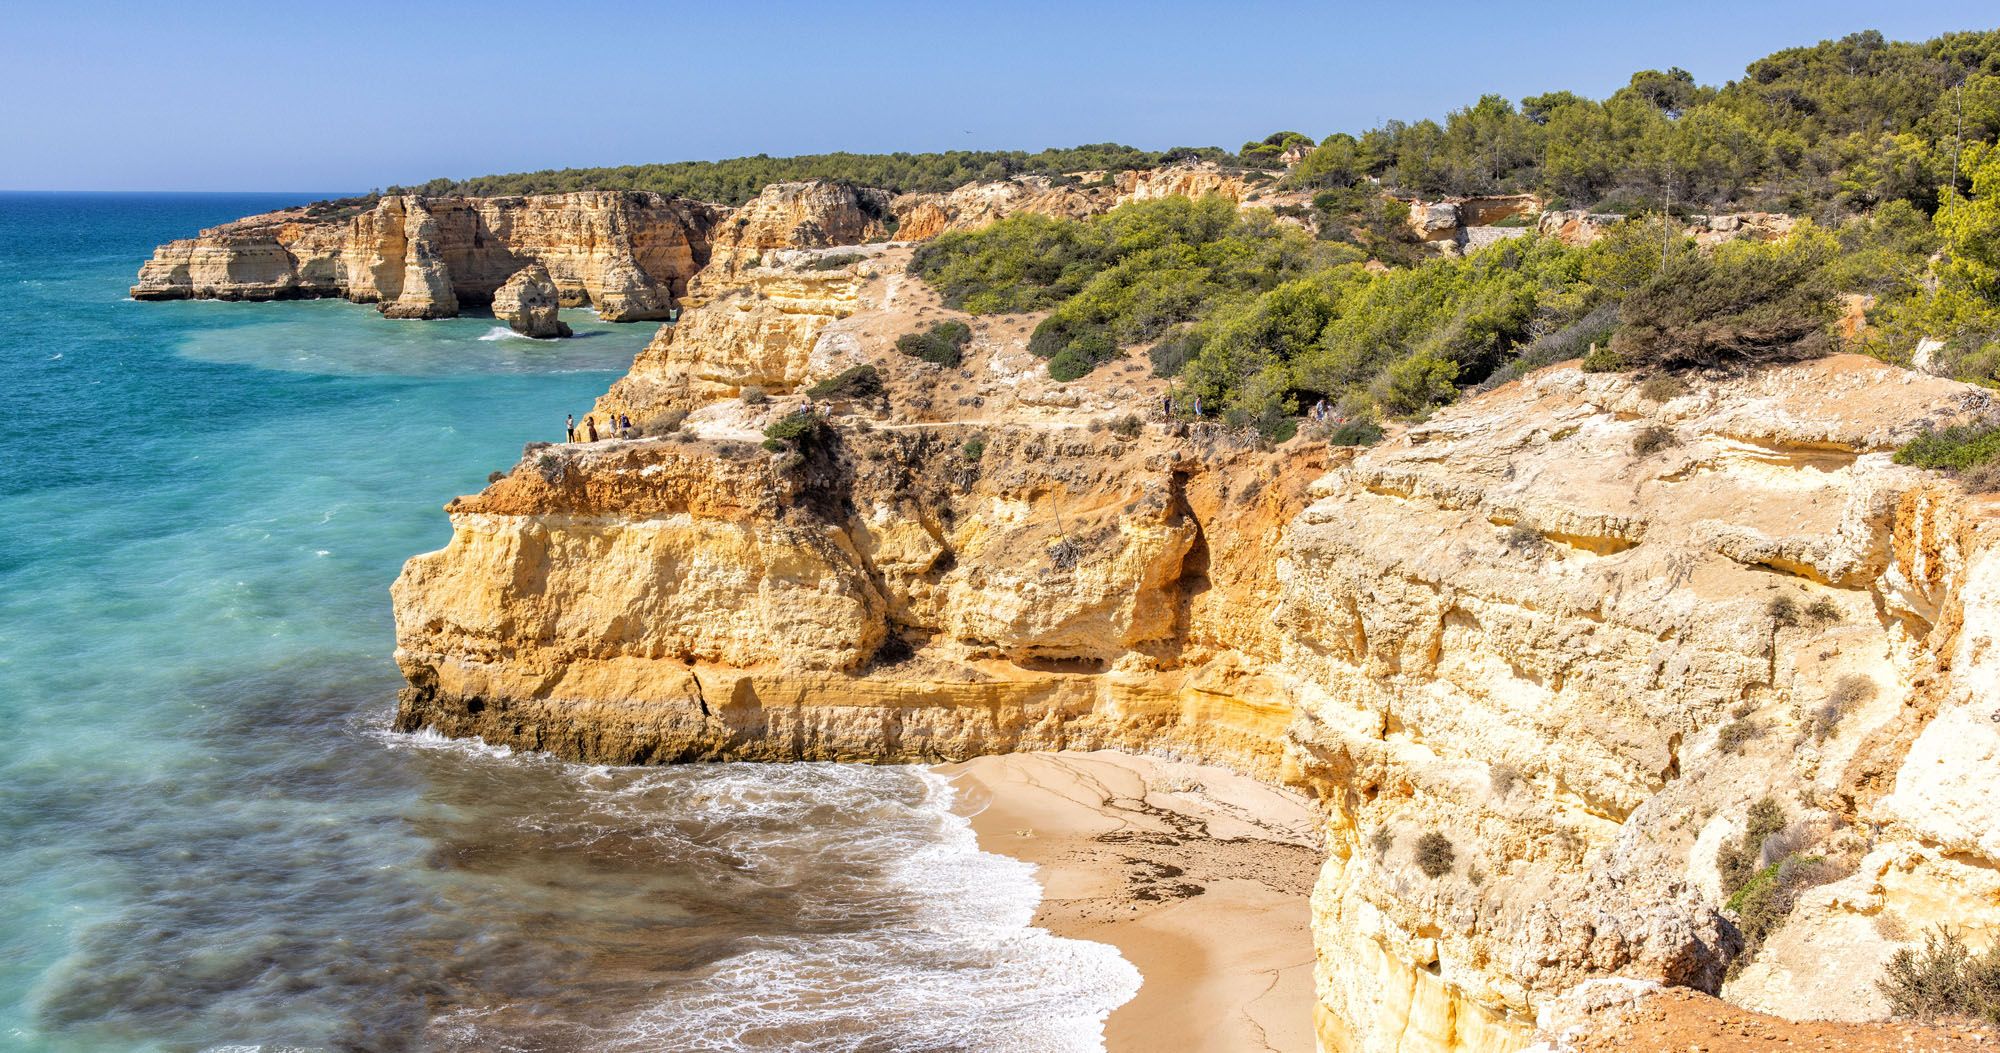 Featured image for “Algarve Itinerary: Plan a Dream Trip to the Algarve, Portugal”